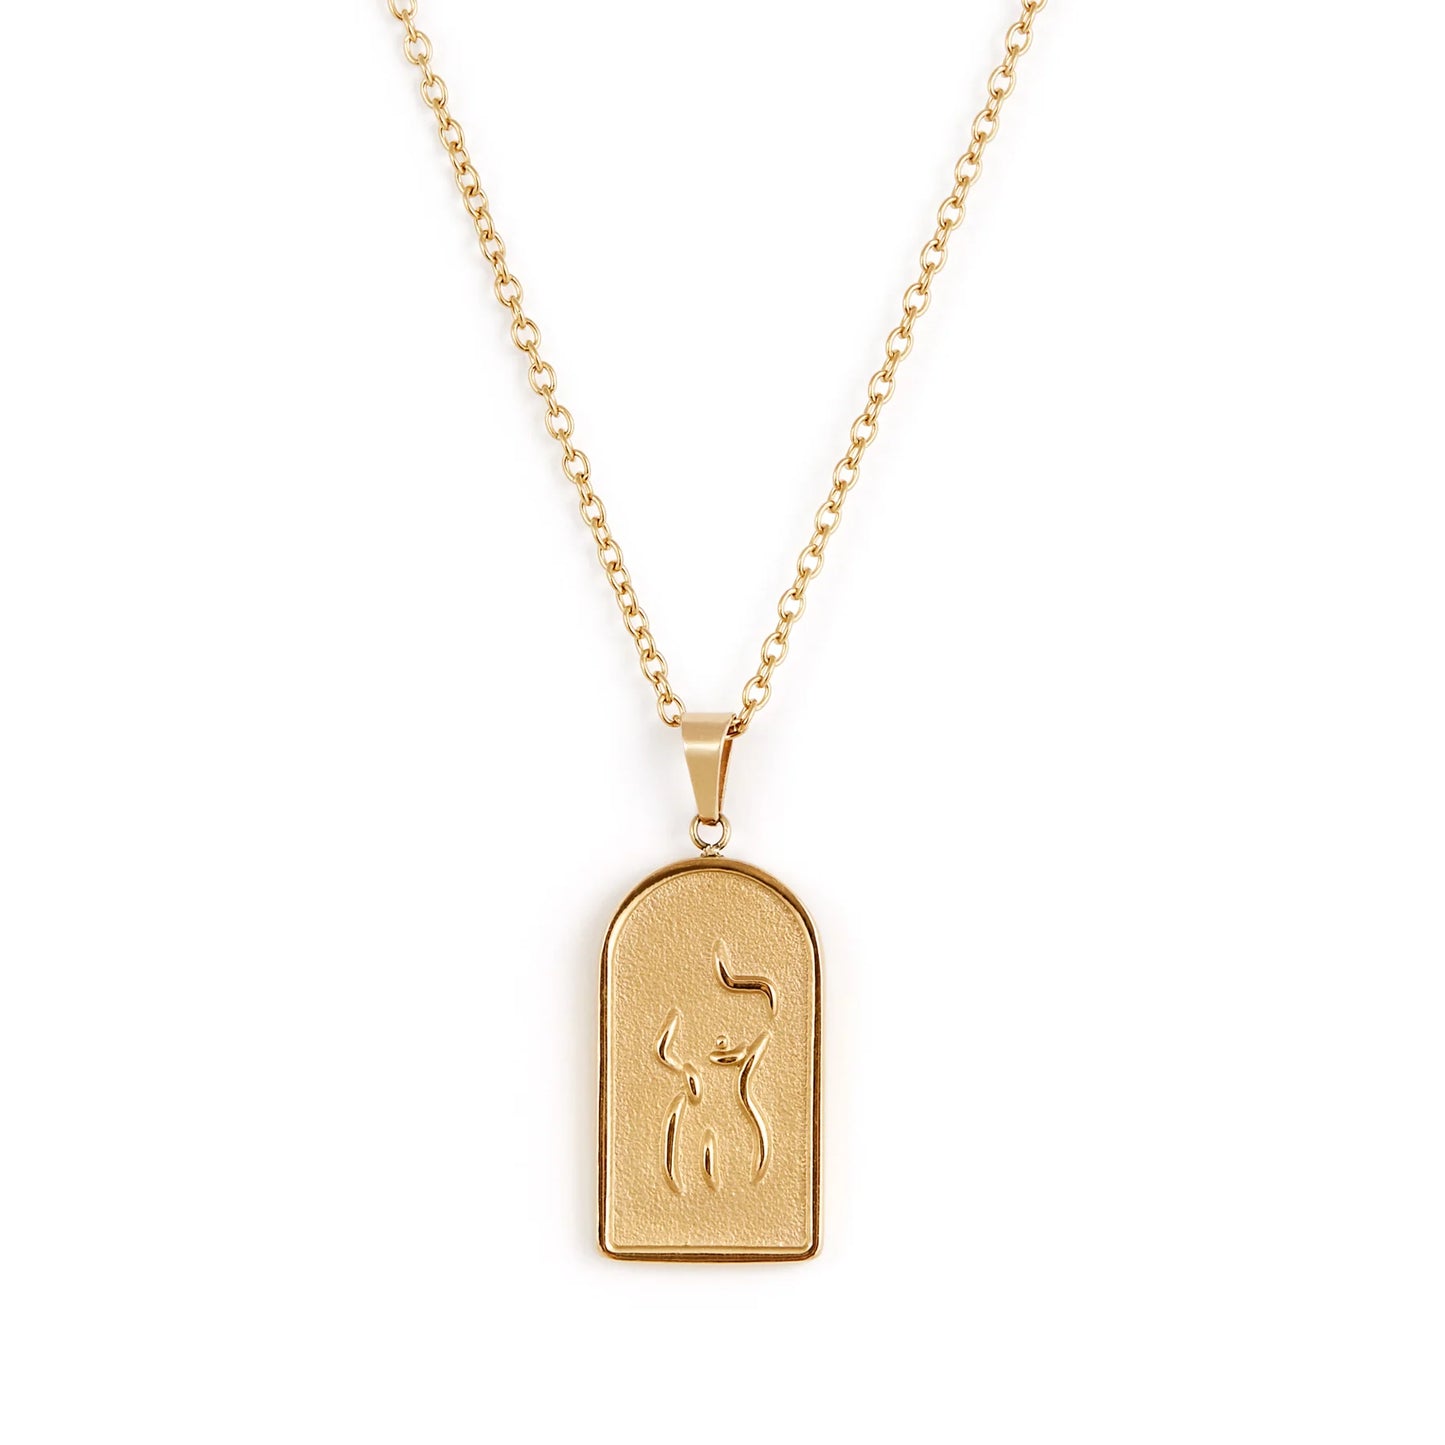 WOMAN necklace - gold plated